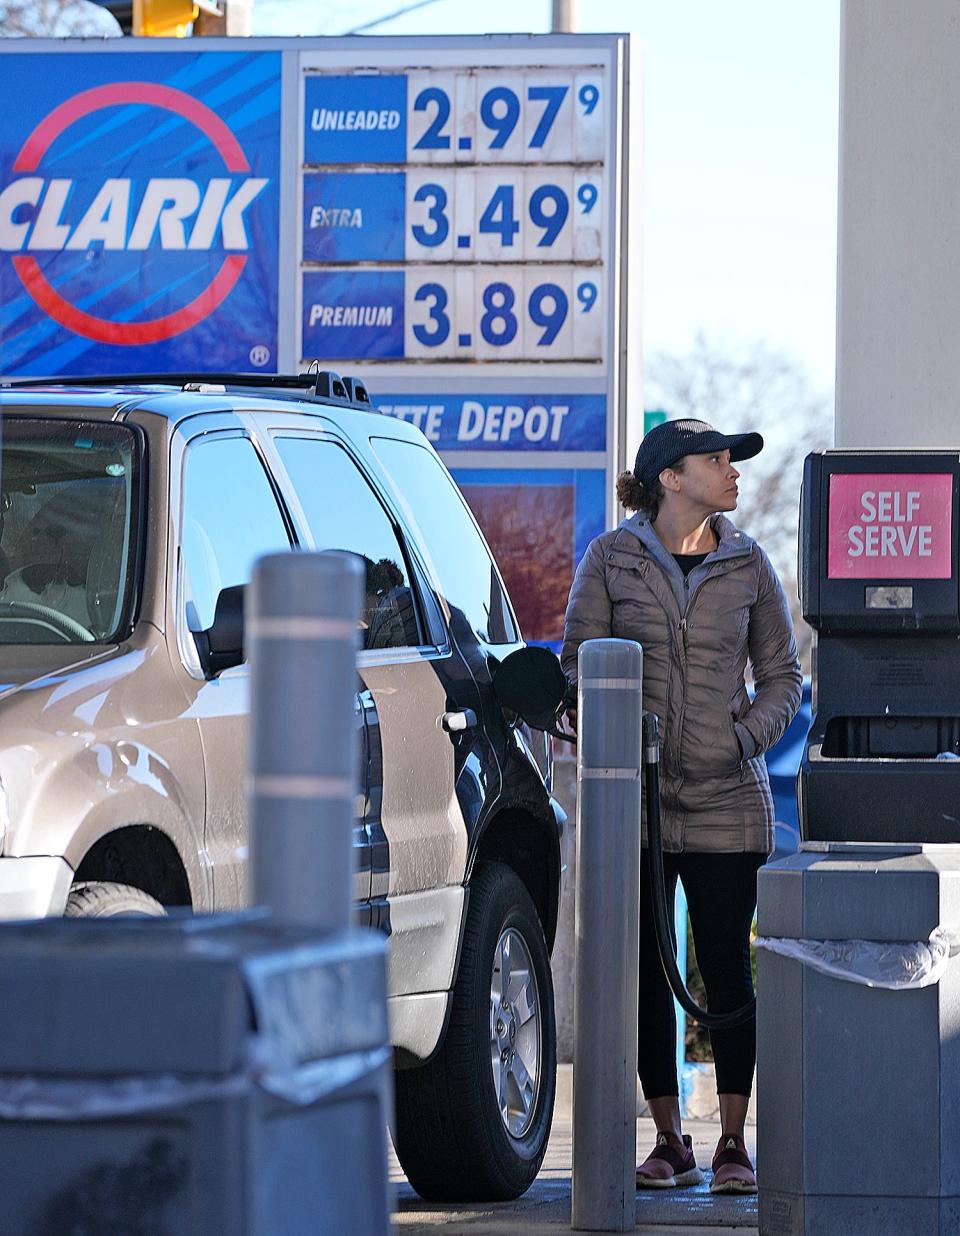 Shanon Kuhagen of Milwaukee fills up for $2.97 a gallon at the Clark gas station on West Oklahoma Avenue at South 16th Street in Milwaukee on Monday. Tuesday's average gasoline price in the Milwaukee-Waukesha area is down to $3.10.